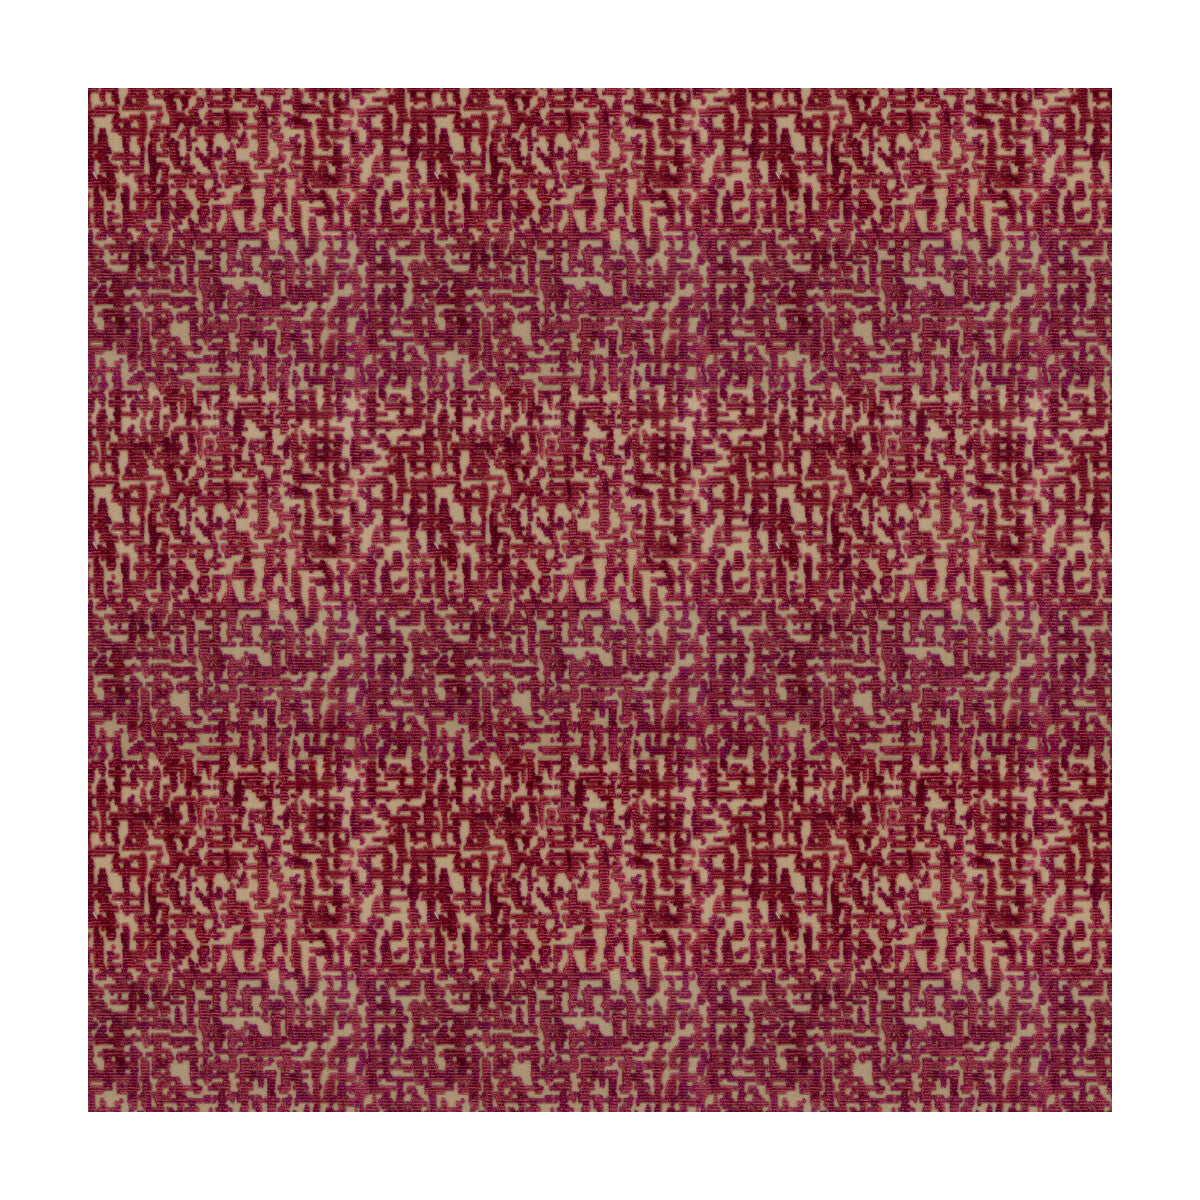 Aillard fabric in red color - pattern 8015131.19.0 - by Brunschwig &amp; Fils in the L&